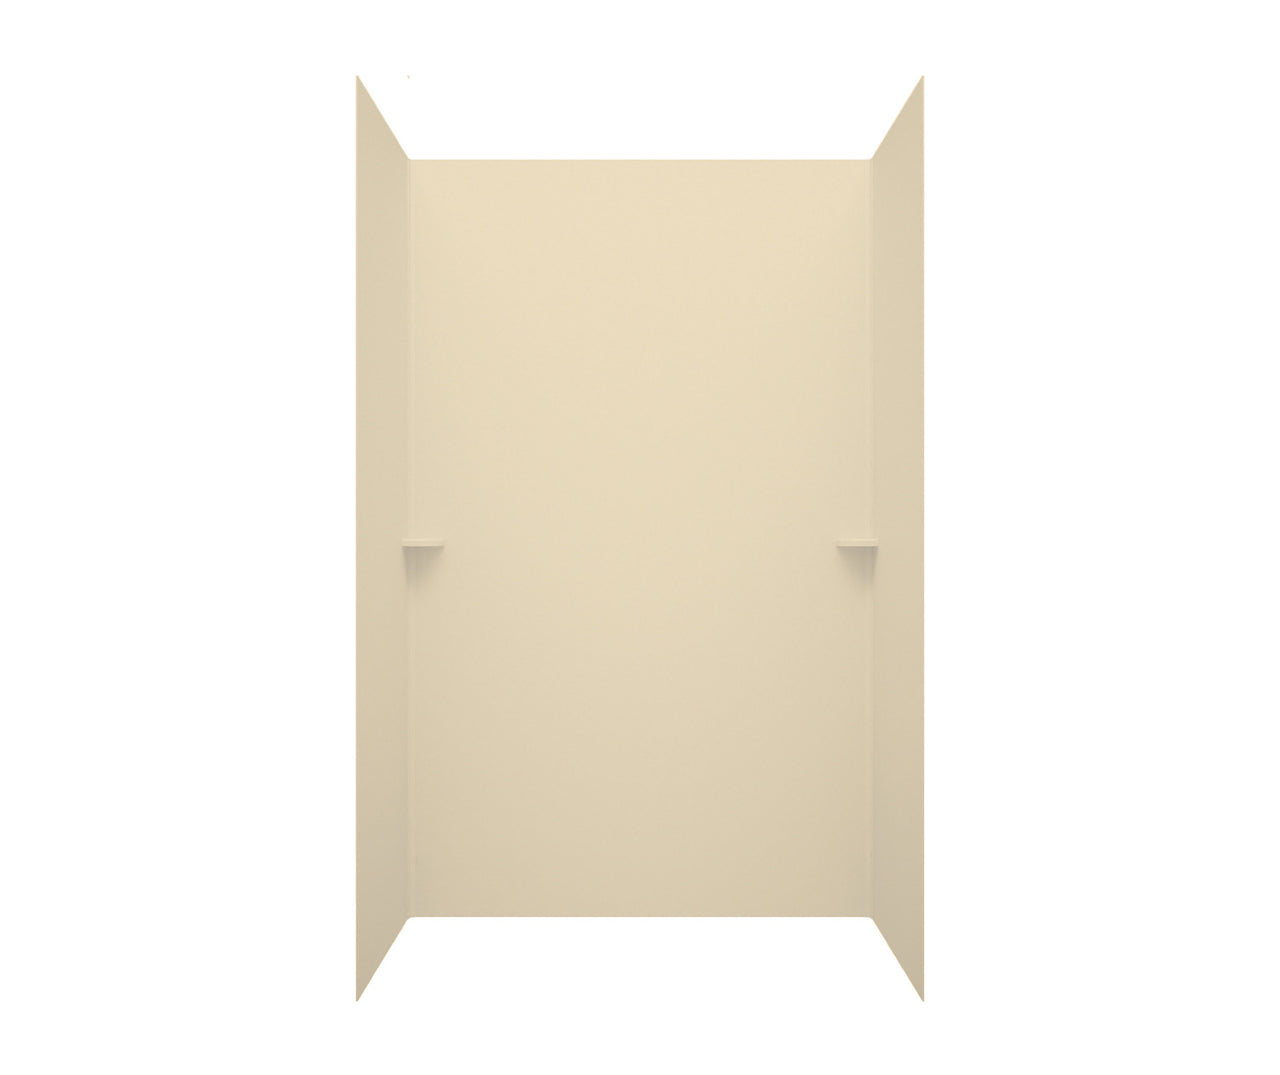 SK-363696 36 x 36 x 96 Swanstone Smooth Glue up Shower Wall Kit in Bone